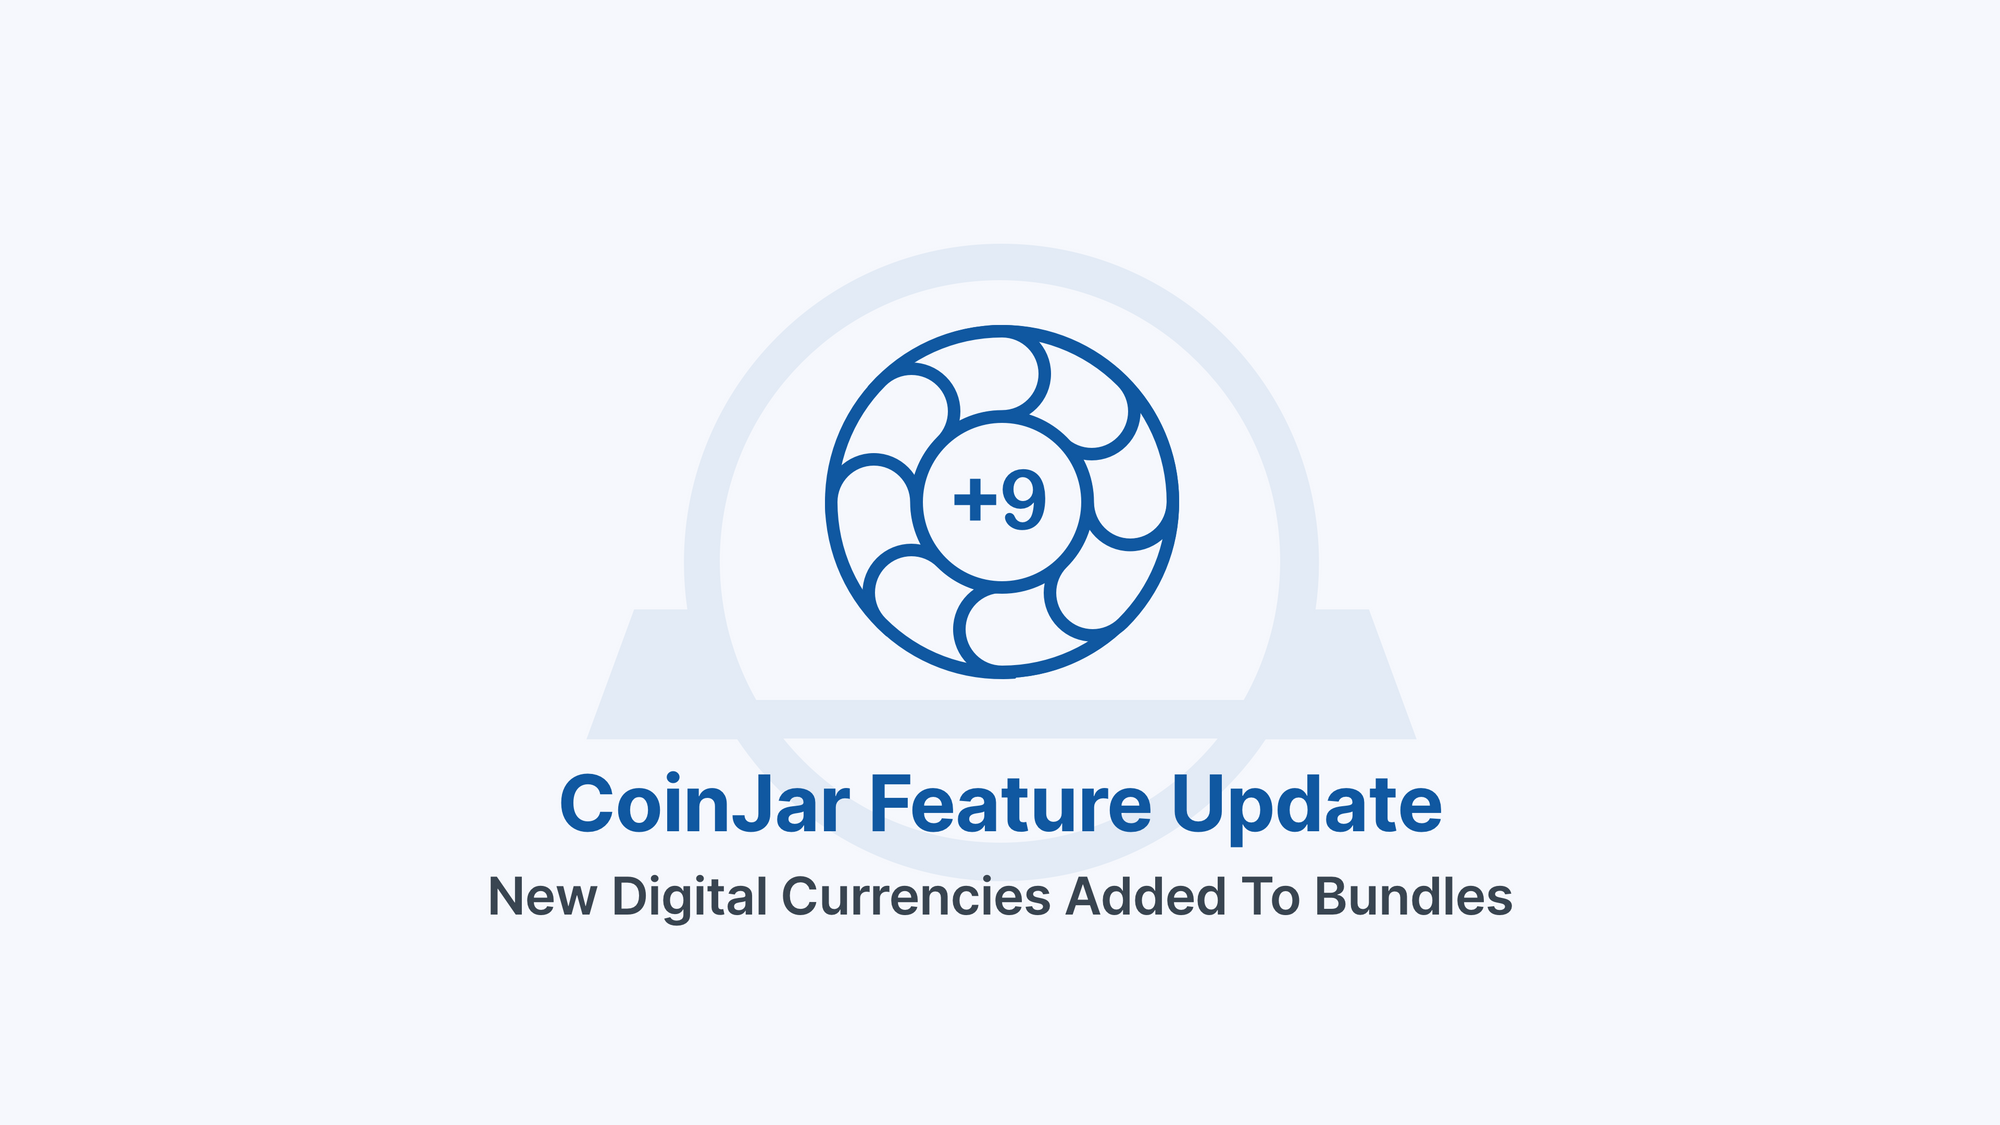 CoinJar Bundles are improving! New tokens and changes to asset allocations.